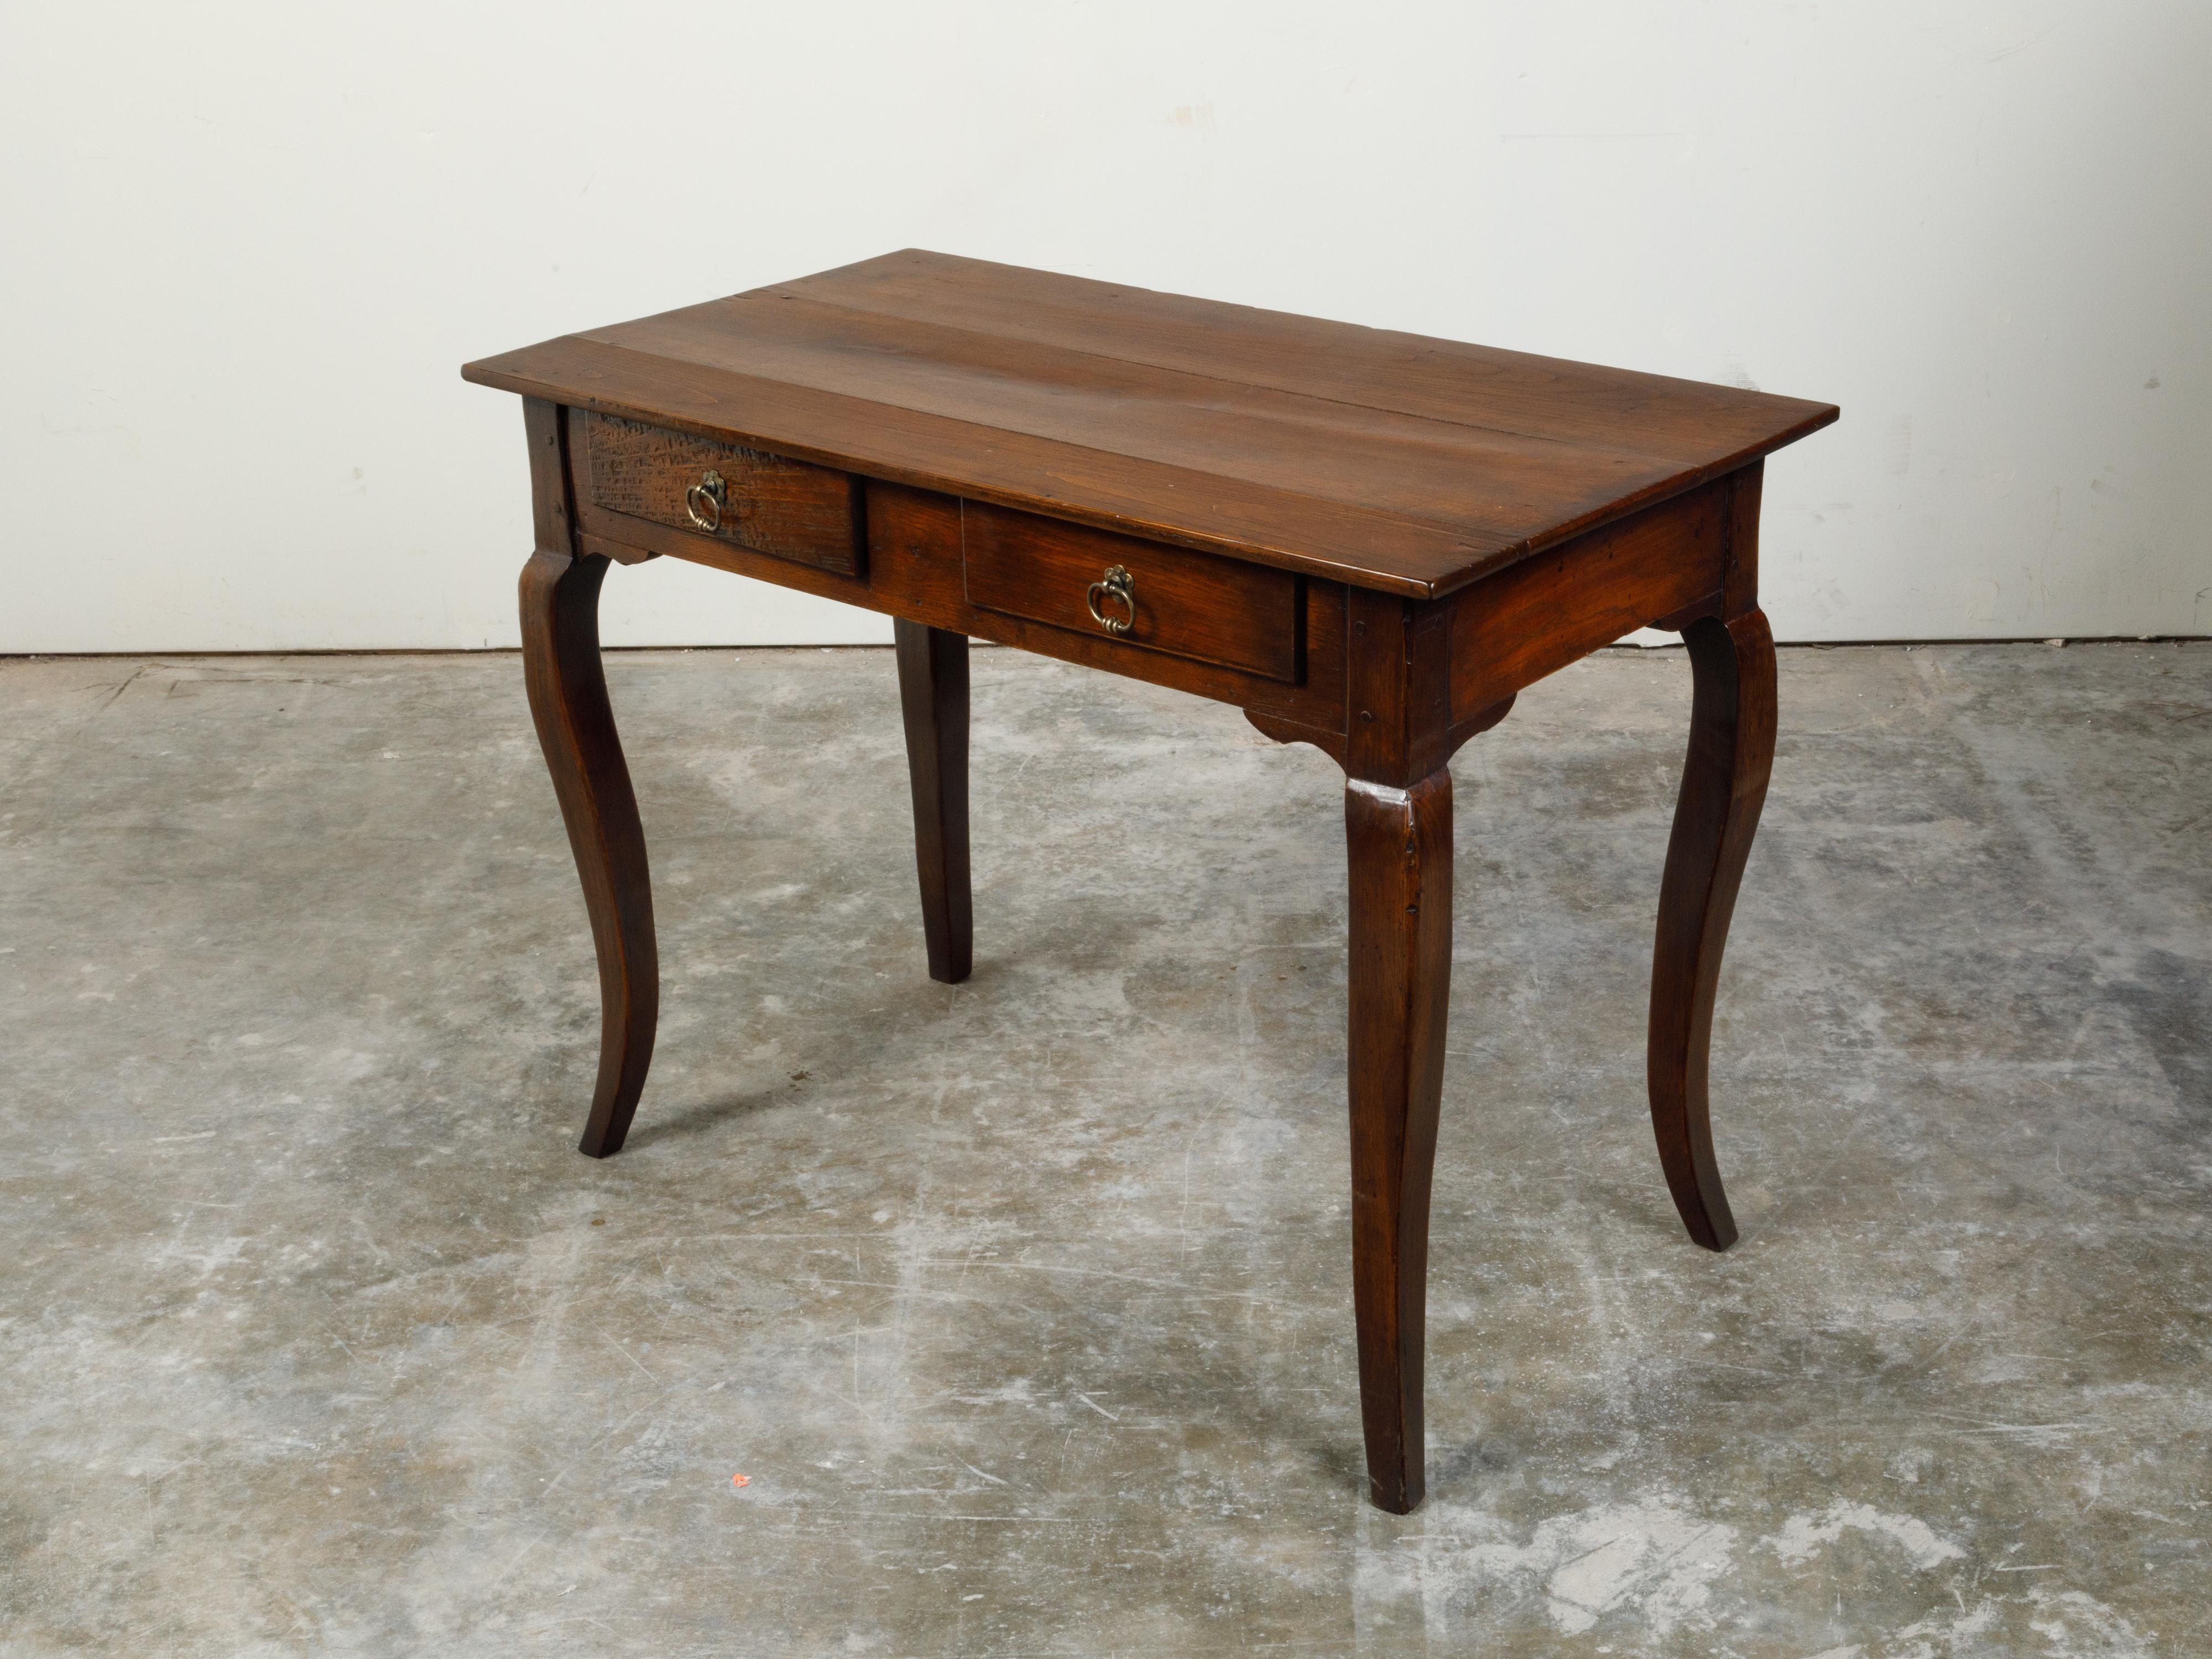 French Louis XV Style 19th Century Walnut Desk with Drawers and Cabriole Legs For Sale 5